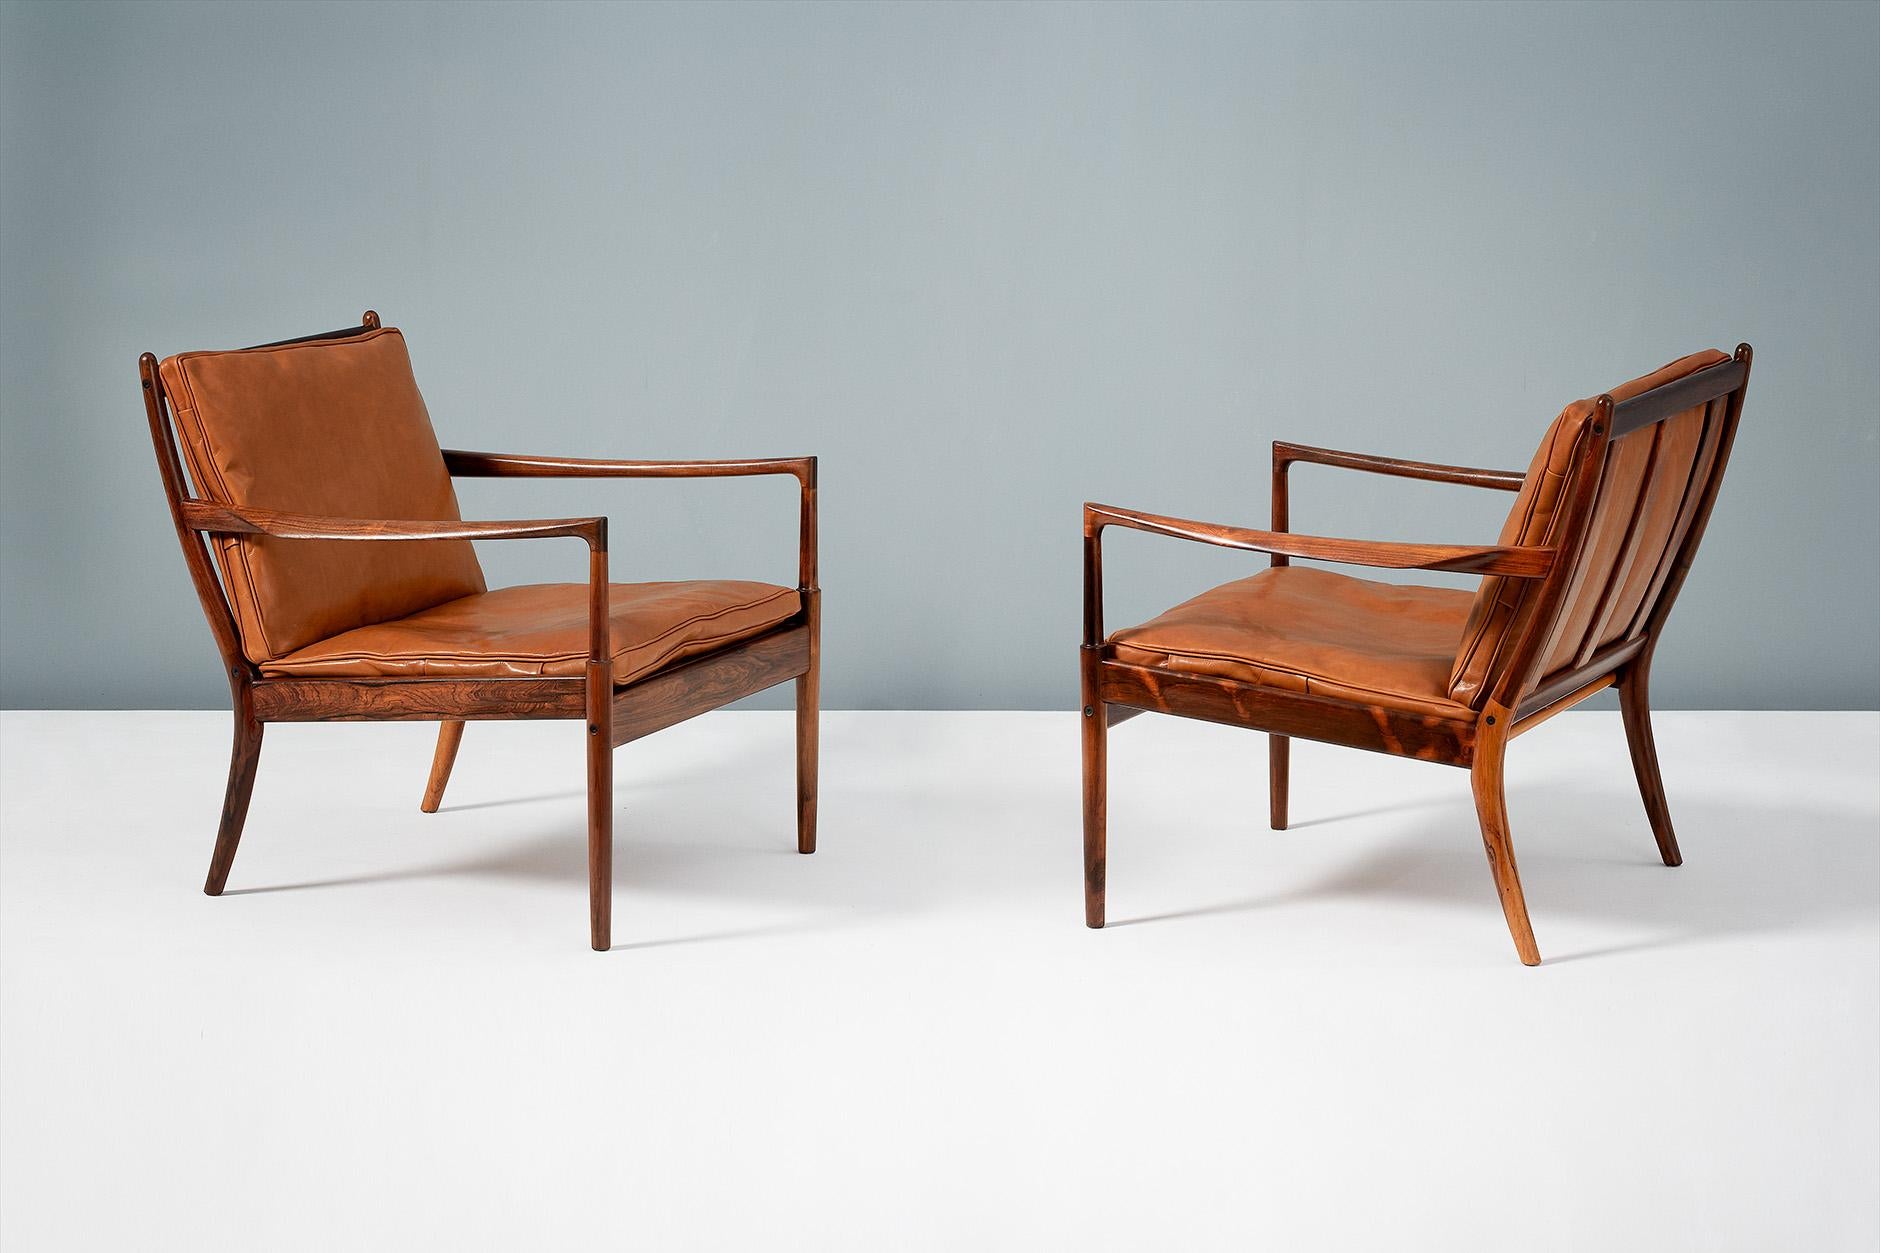 Ib Kofod-Larsen Rosewood Samso Chairs, circa 1960 In Excellent Condition For Sale In London, GB